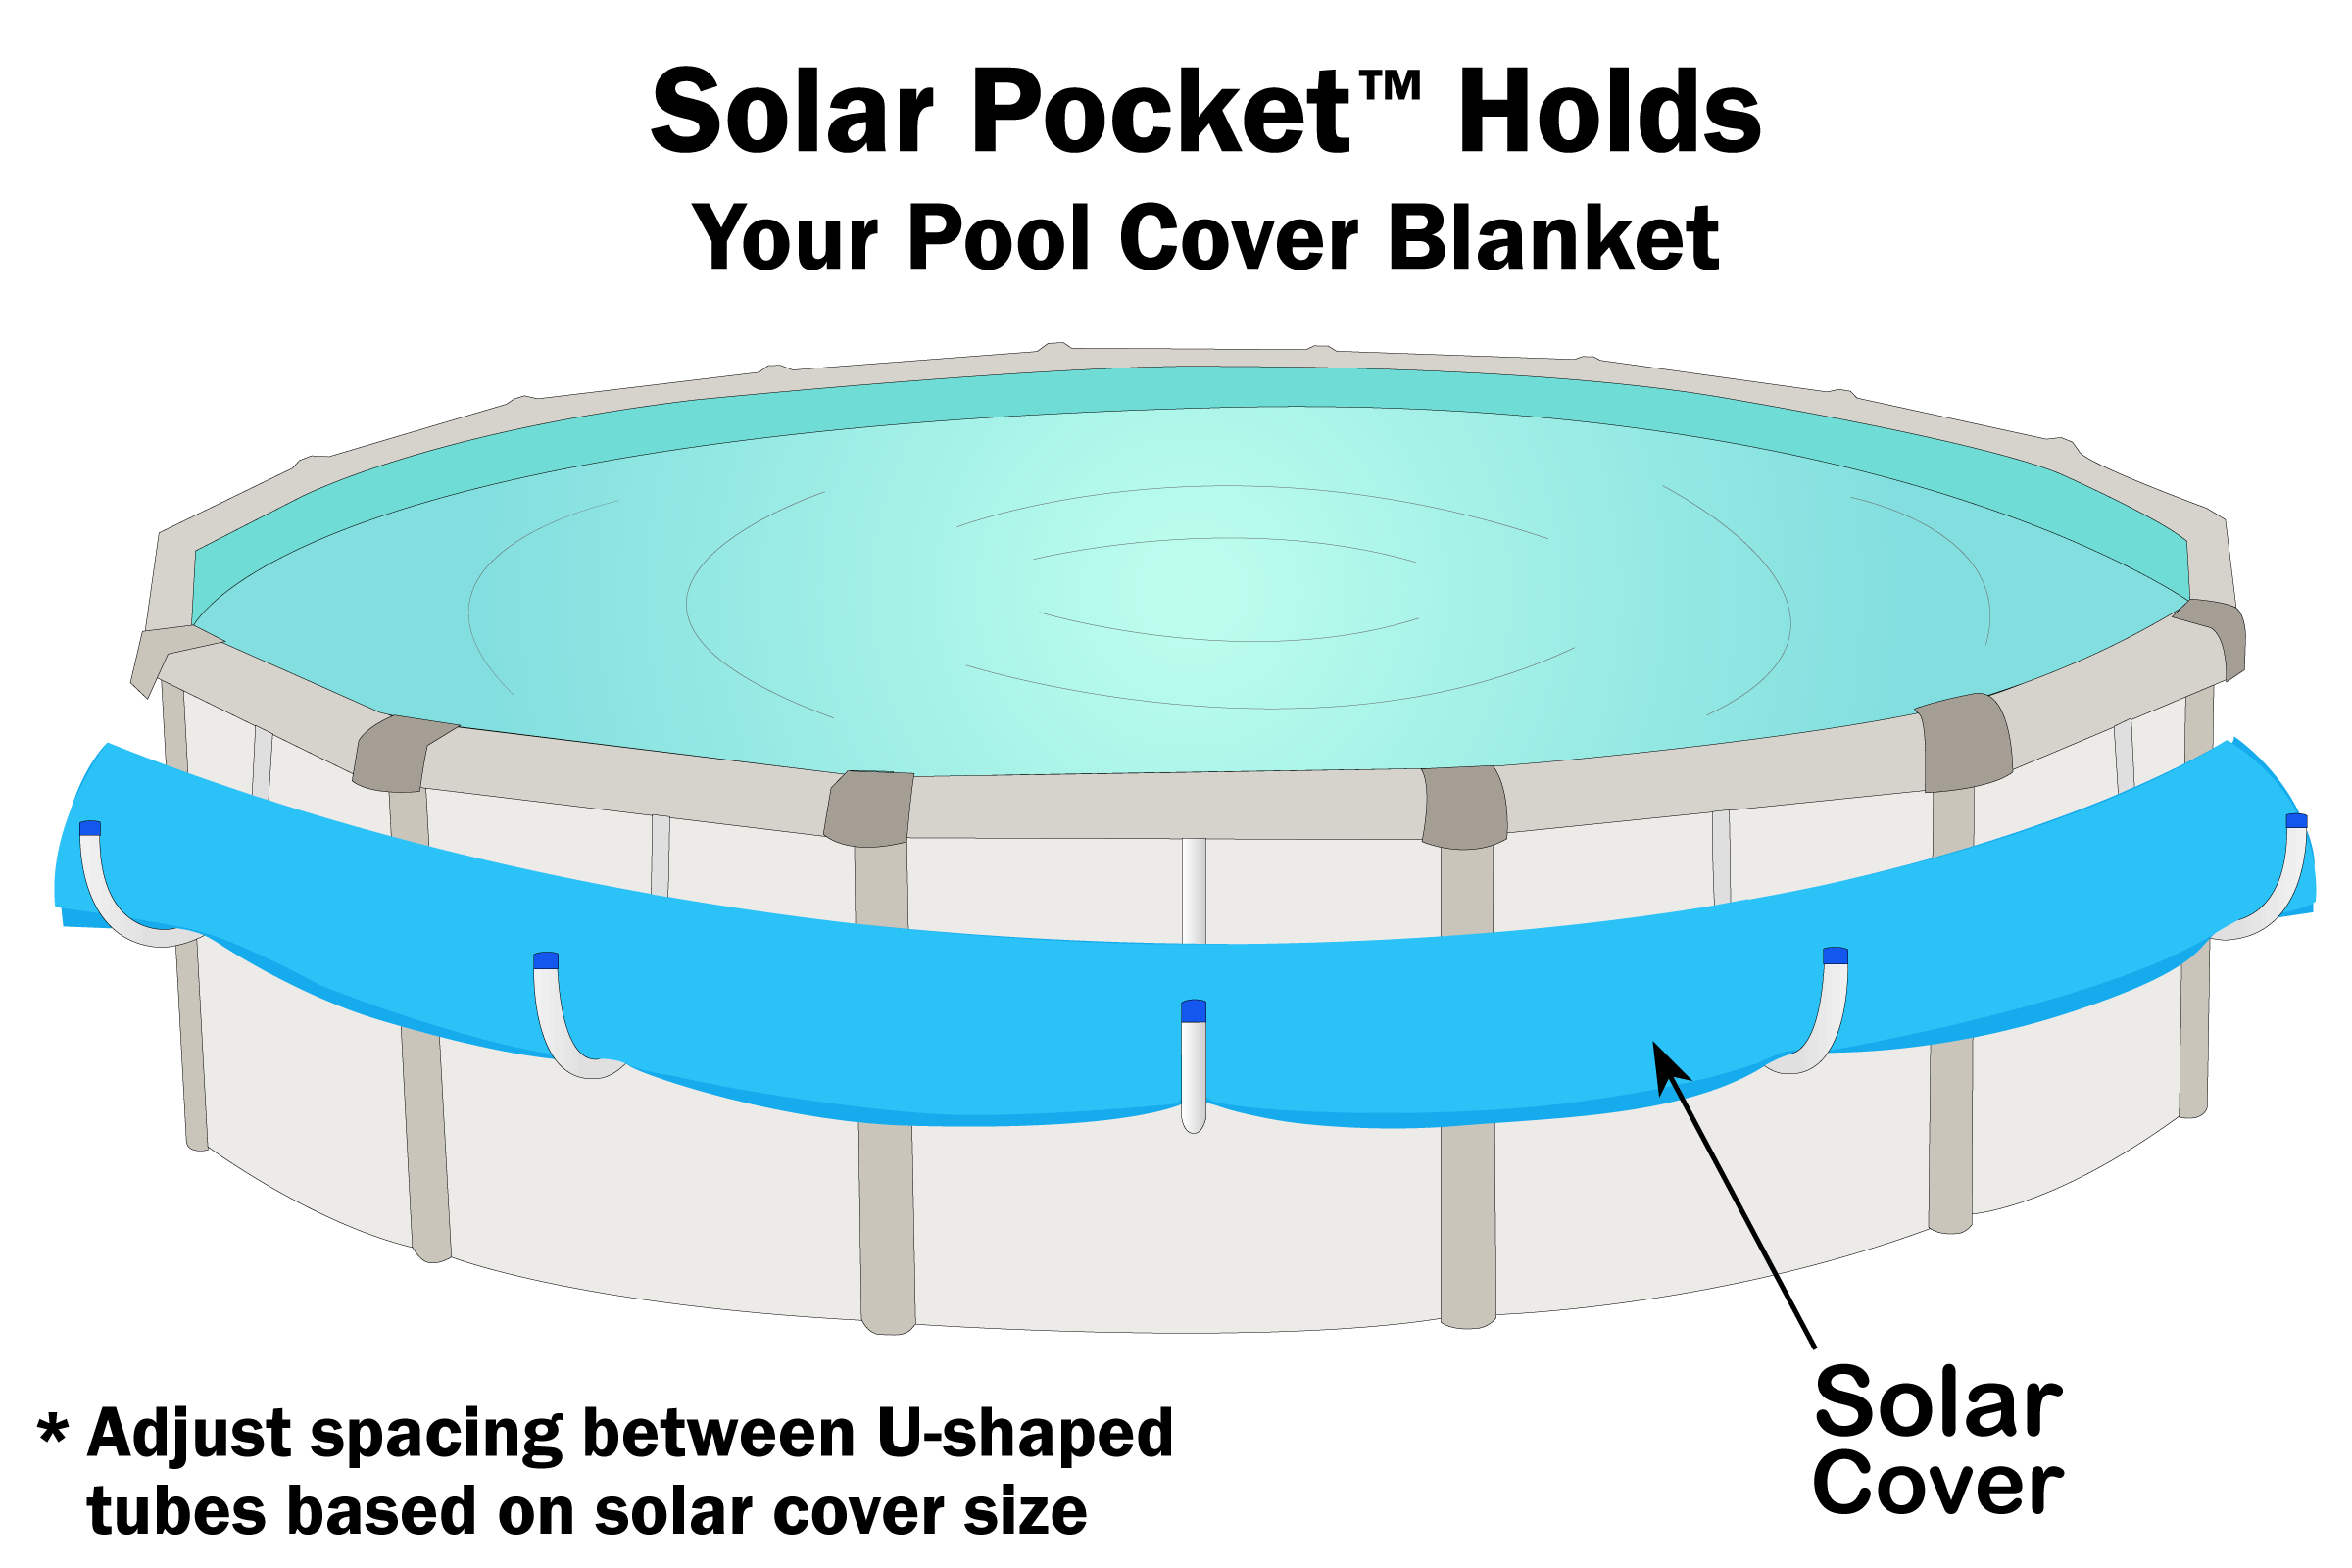 5-Piece Aluminum U-Shaped Tube Set Designed for Steel-Wall Above-Ground Swimming Pools Sun2Solar Solar Pocket Cover Holder Keep Solar Blankets Off The Ground Easy Storage and Retrieval 